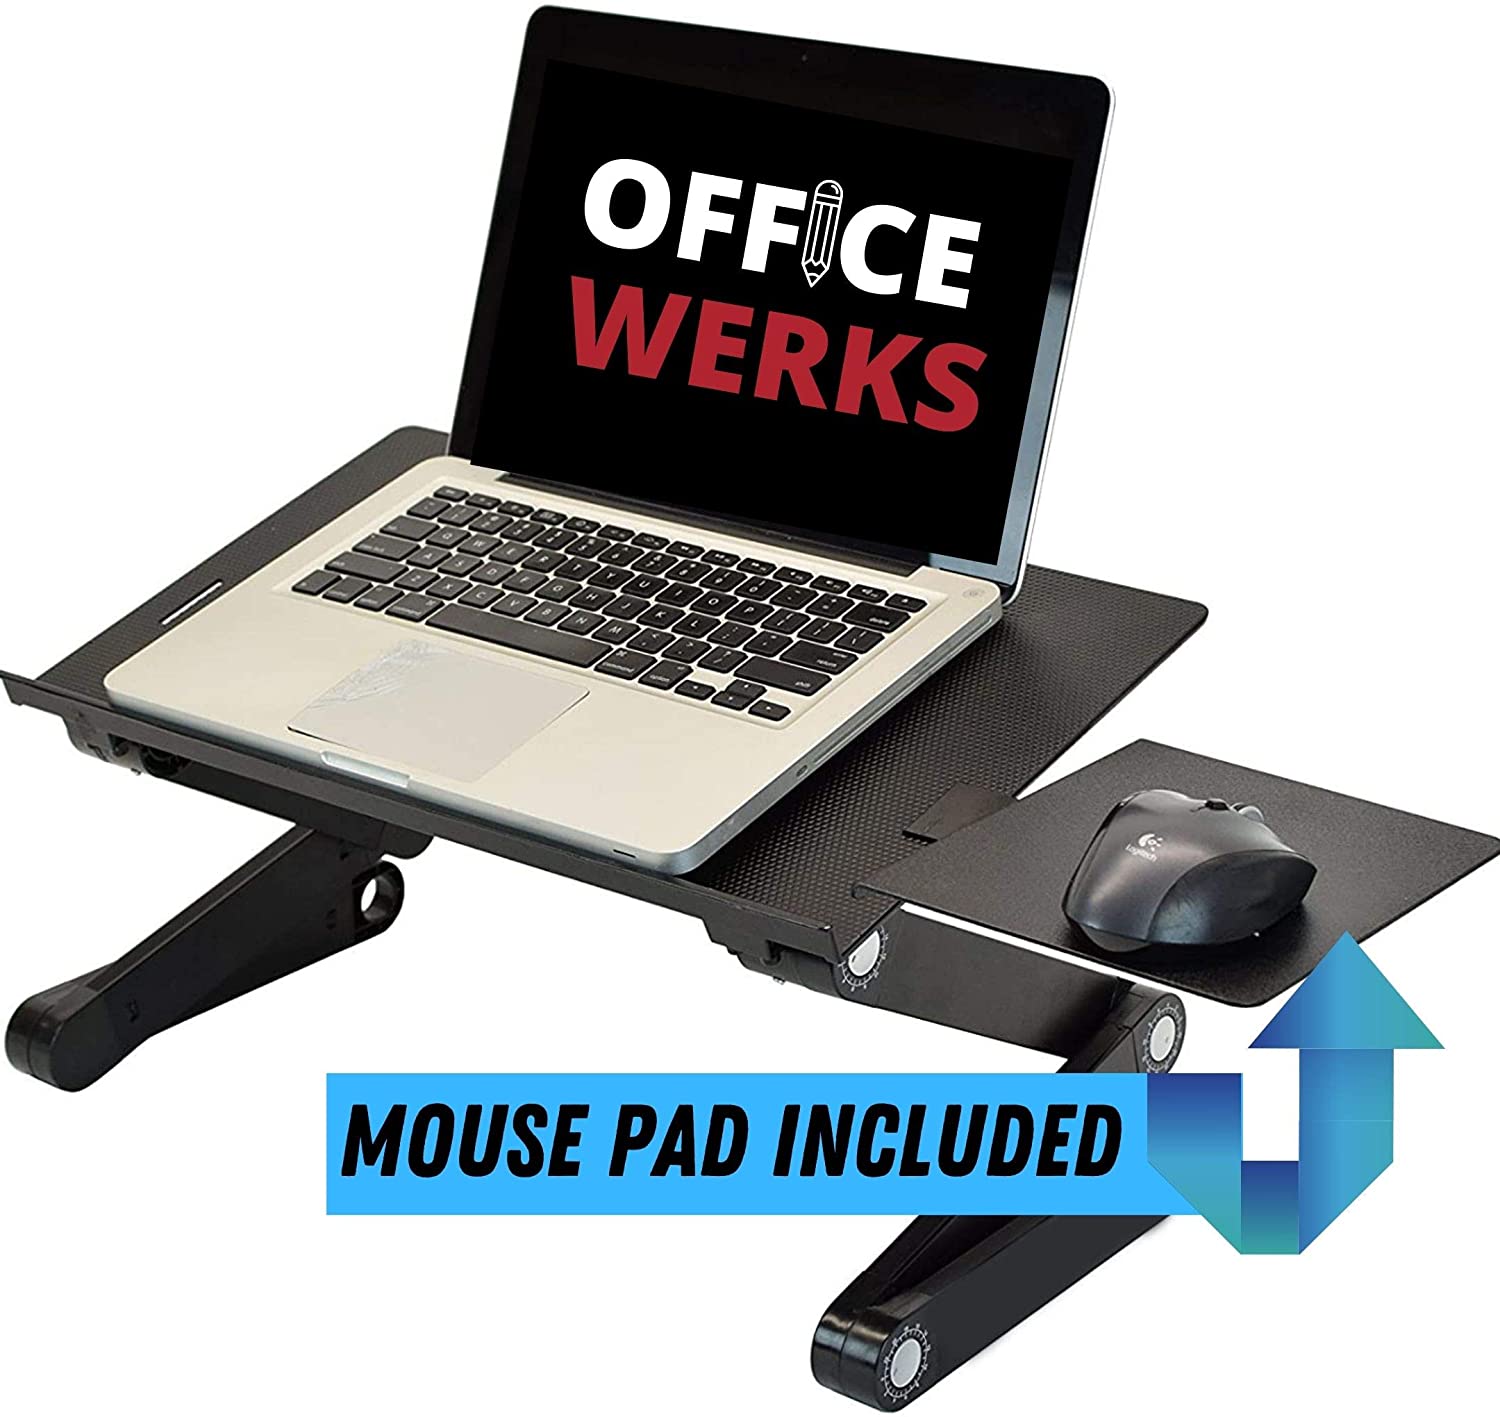 5 Reasons Why Your Next Purchase Should Be The Office Werks Adjustable Laptop Stand.